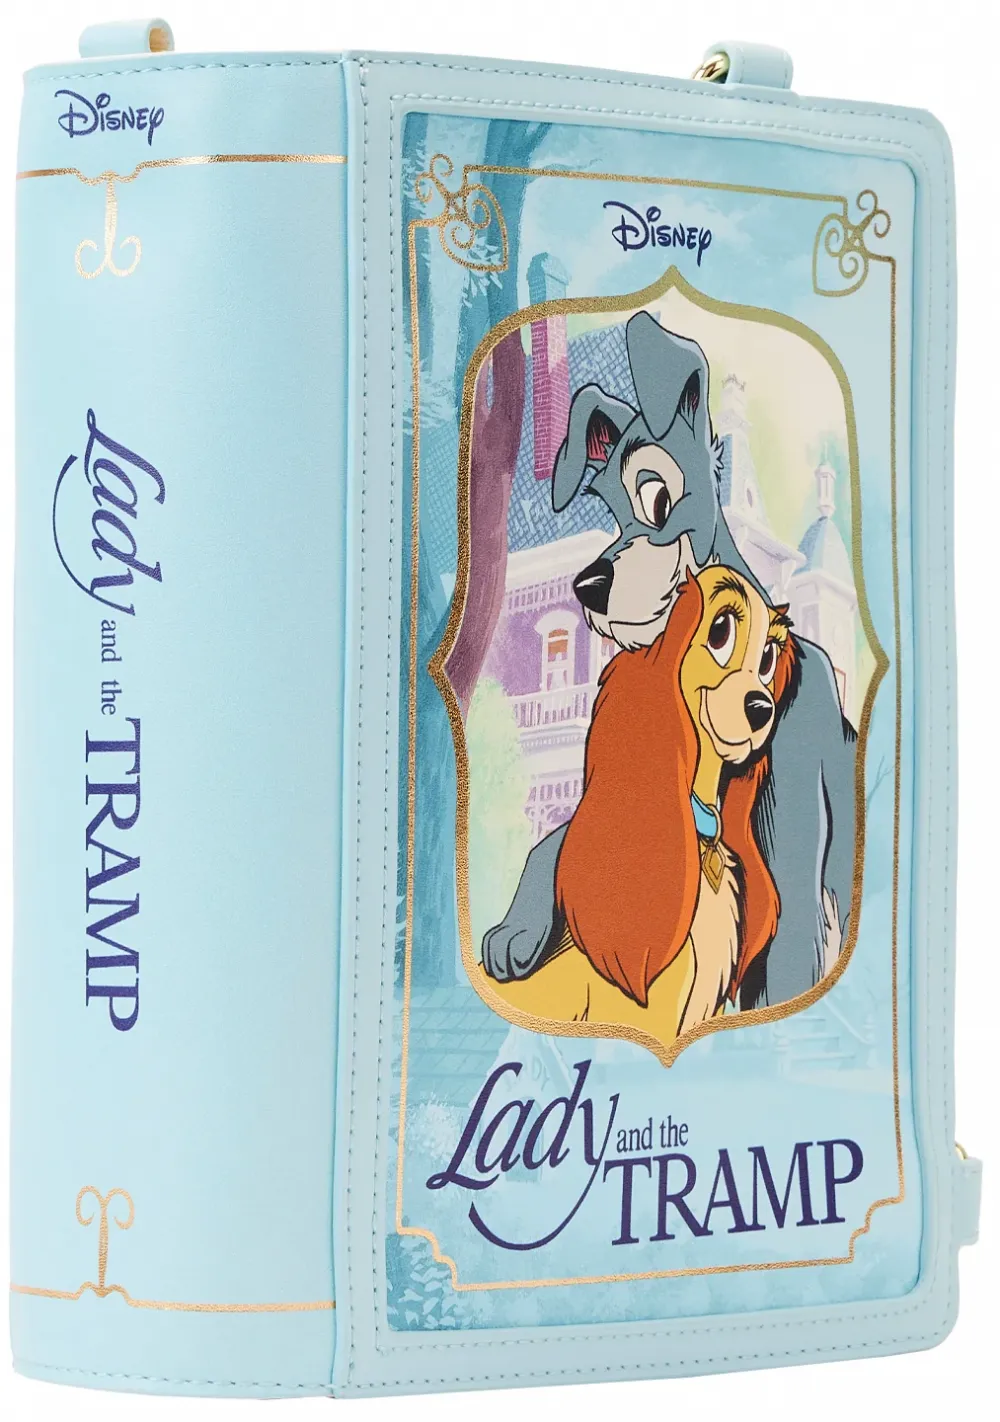 Lady and the Tramp Book Convertible Crossbody Bag Loungefly